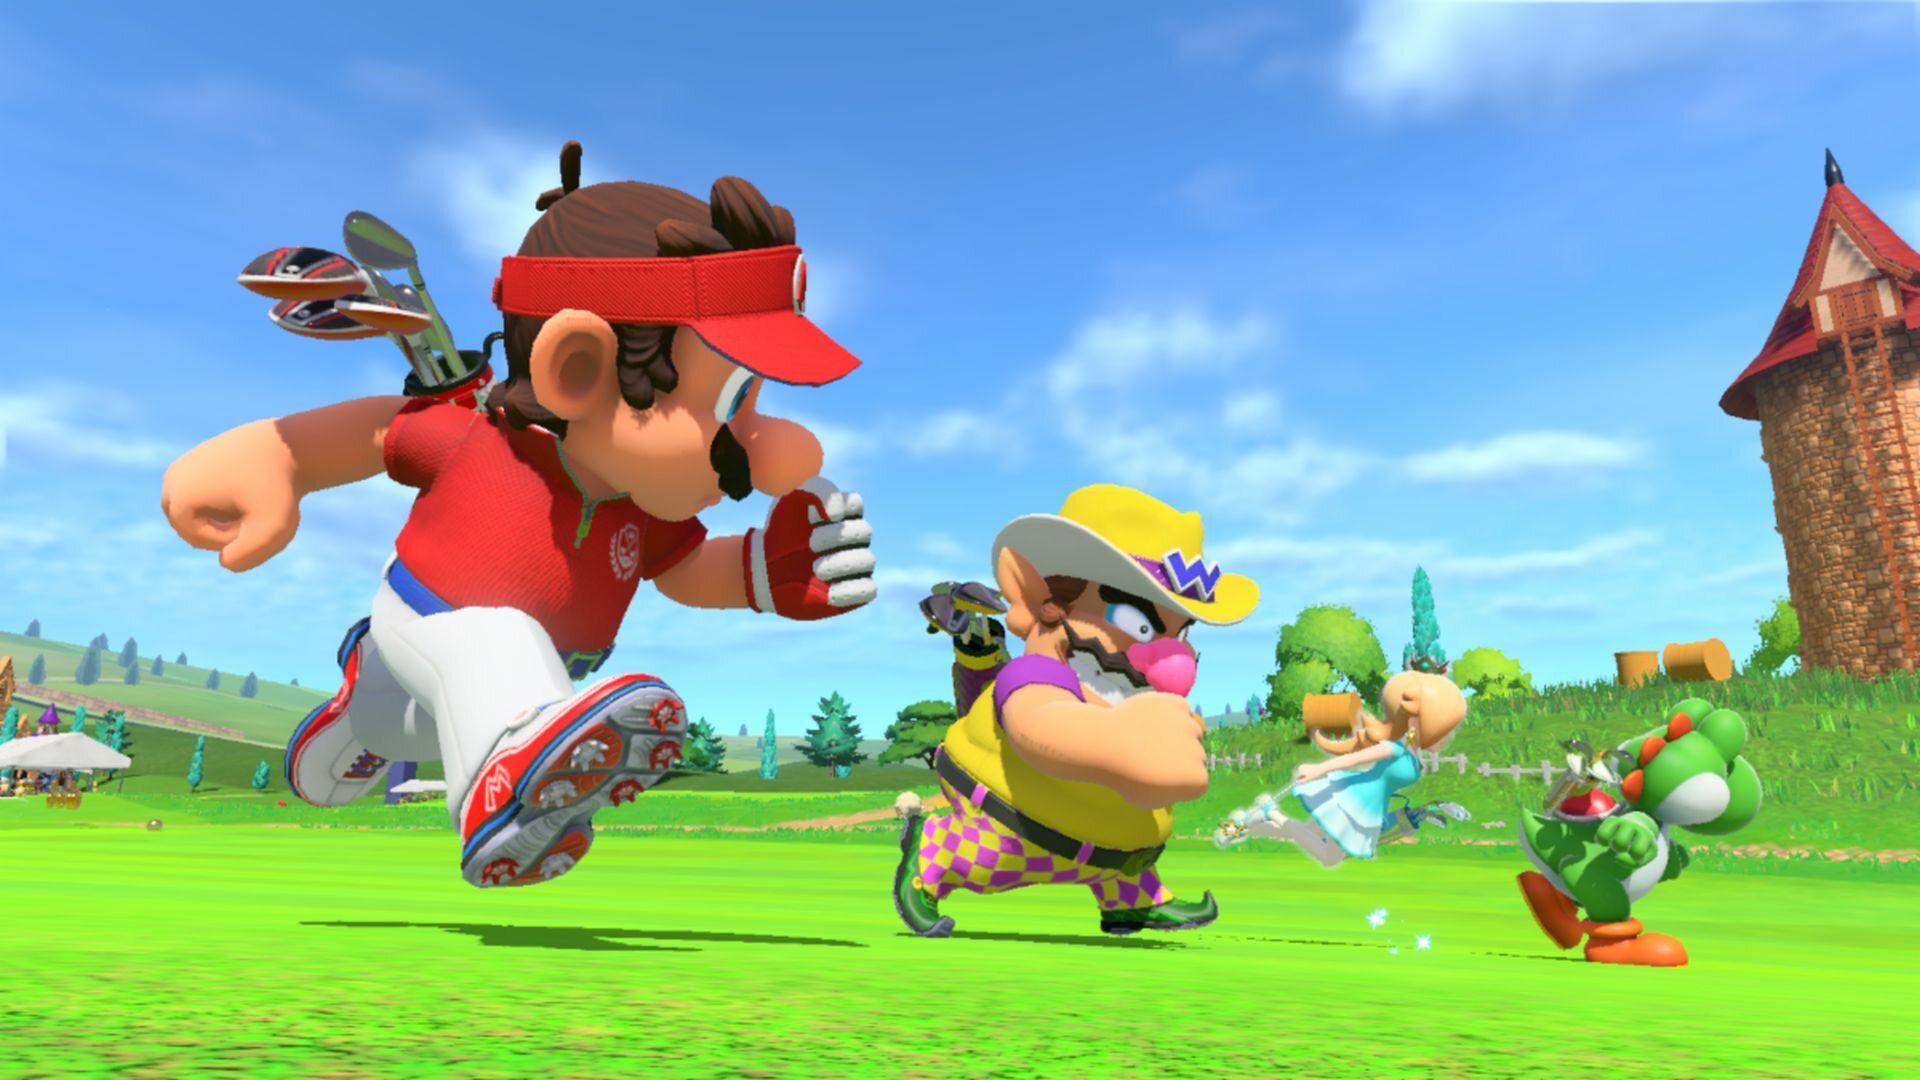 Does Mario Golf: Super Rush have online multiplayer?